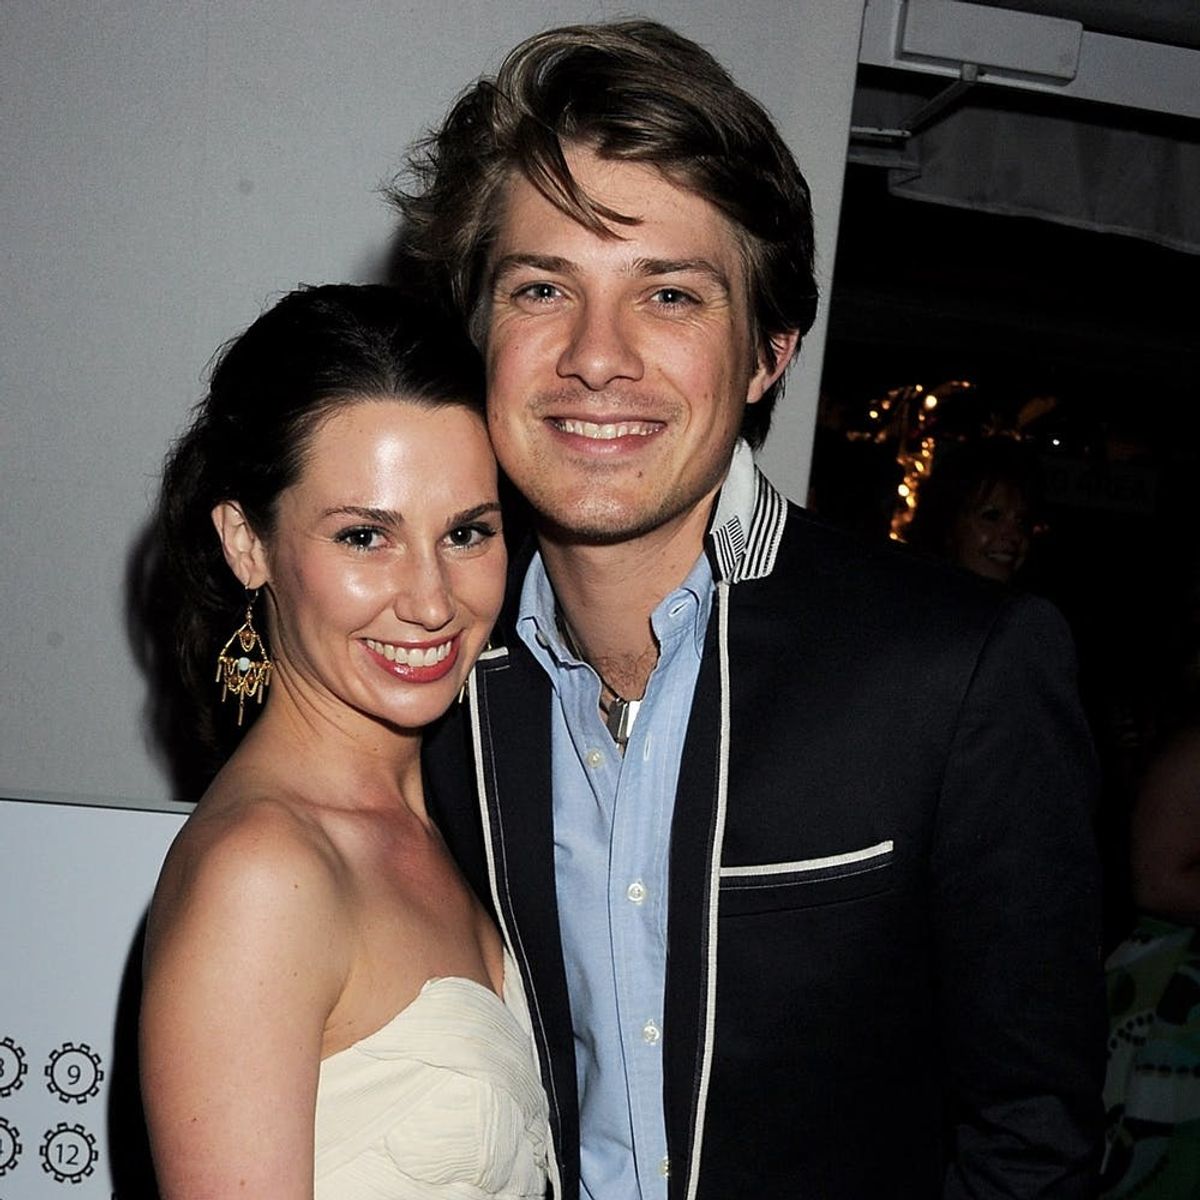 Taylor Hanson and His Wife Natalie Are Expecting Baby #6!